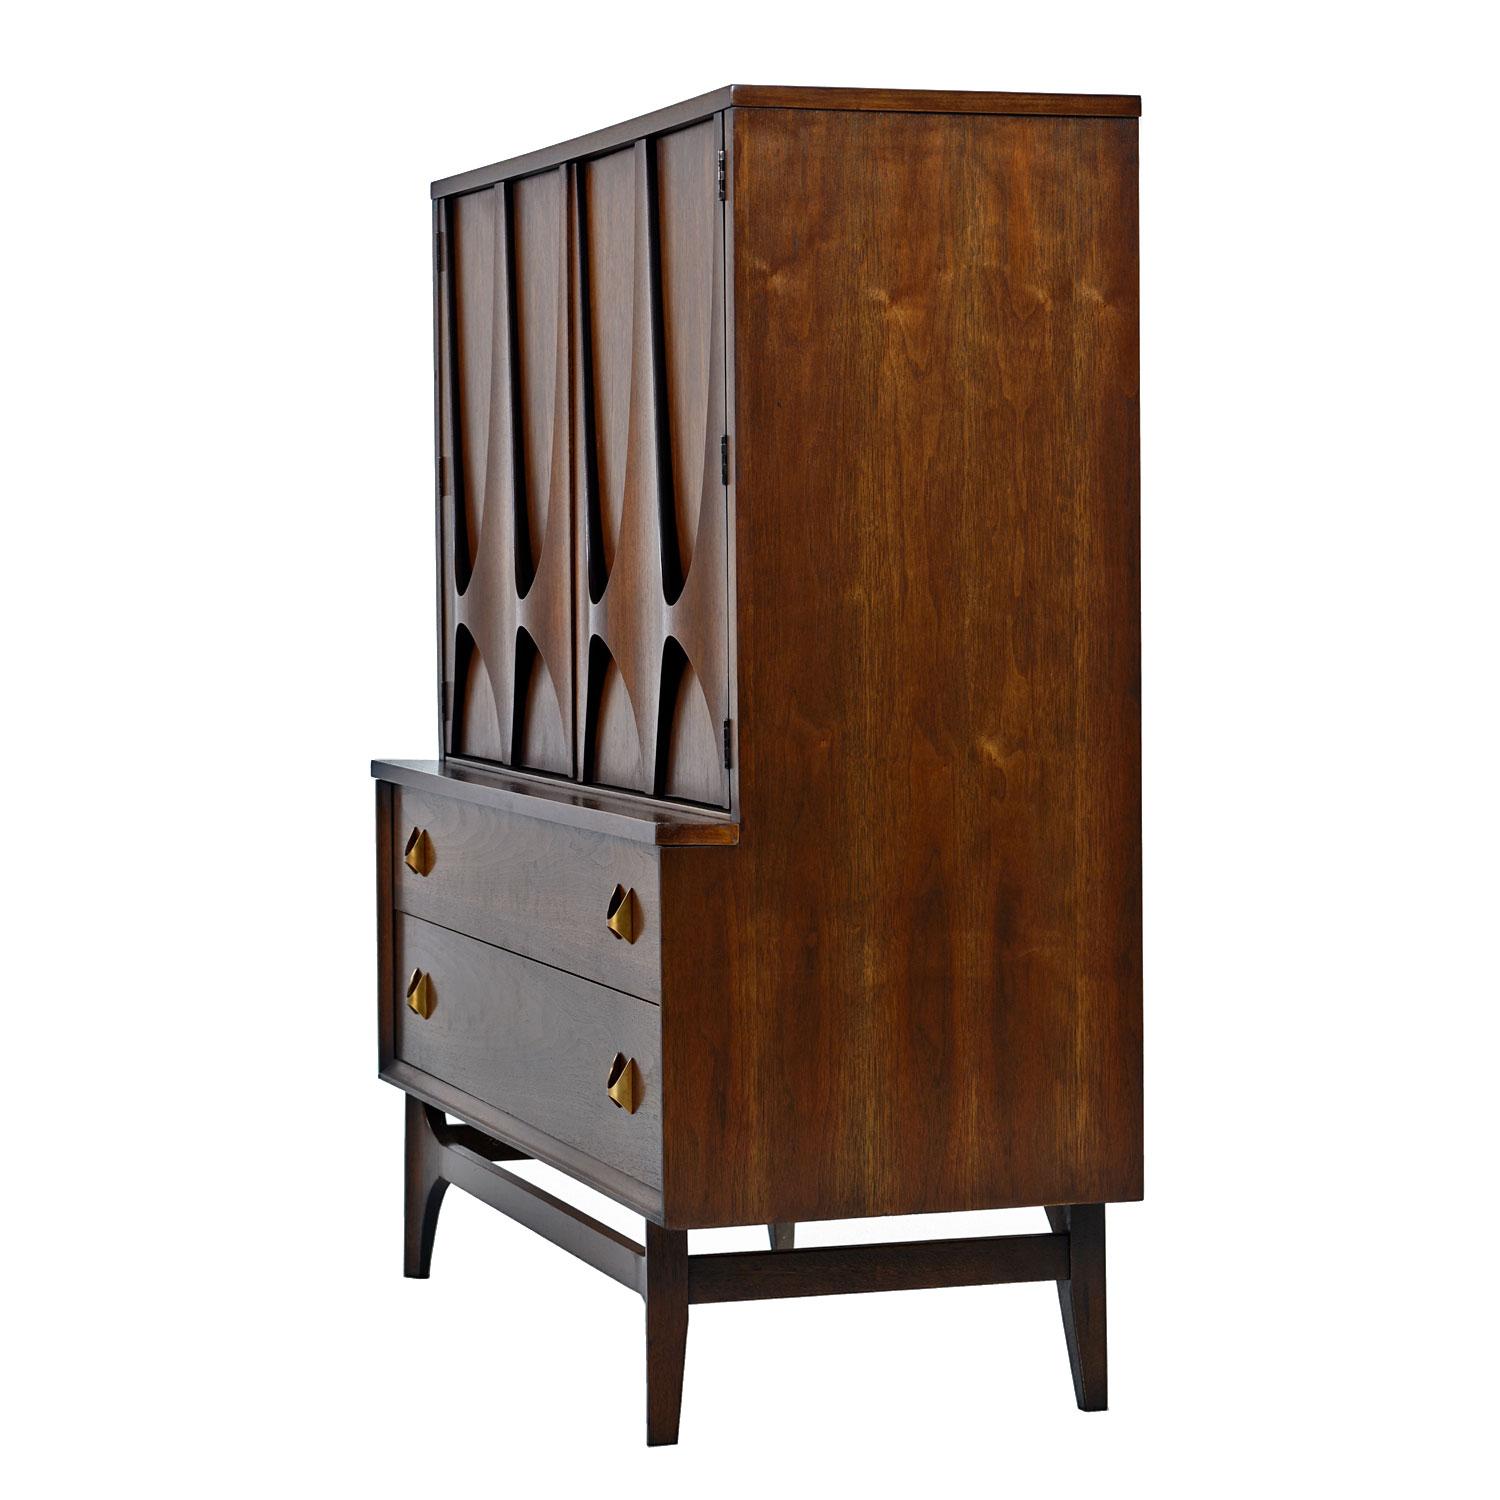 Part of a complete bedroom set, this gentleman's dresser was delicately restored to preserve the original dark patina. We would find this dresser fairly often over the years, but Brasilia has elevated to a high-end status that has made them very